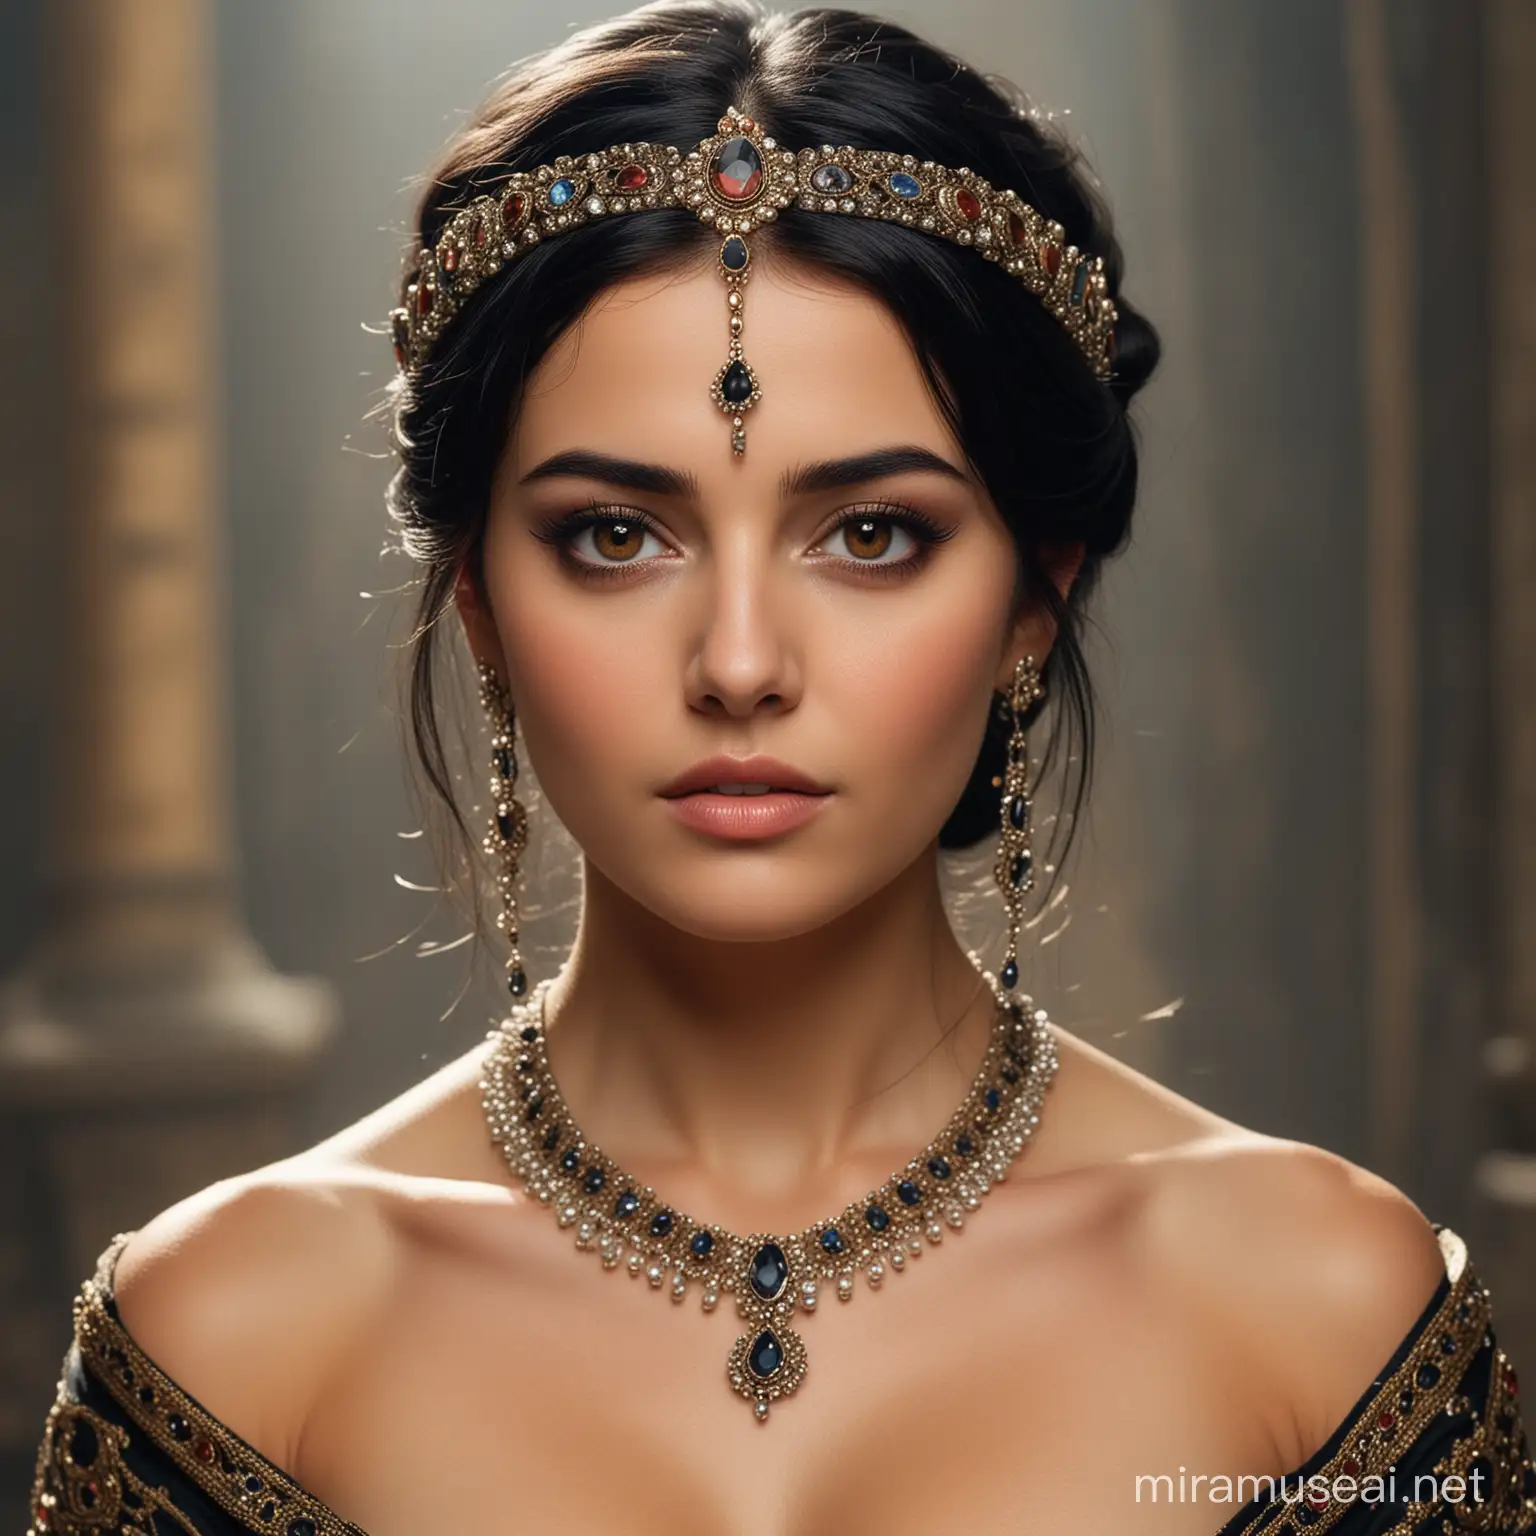 A woman of incredible beauty, dressed in jewels, charming and attractive with blck hair brown eyes,with a stern look. From the twelfth century